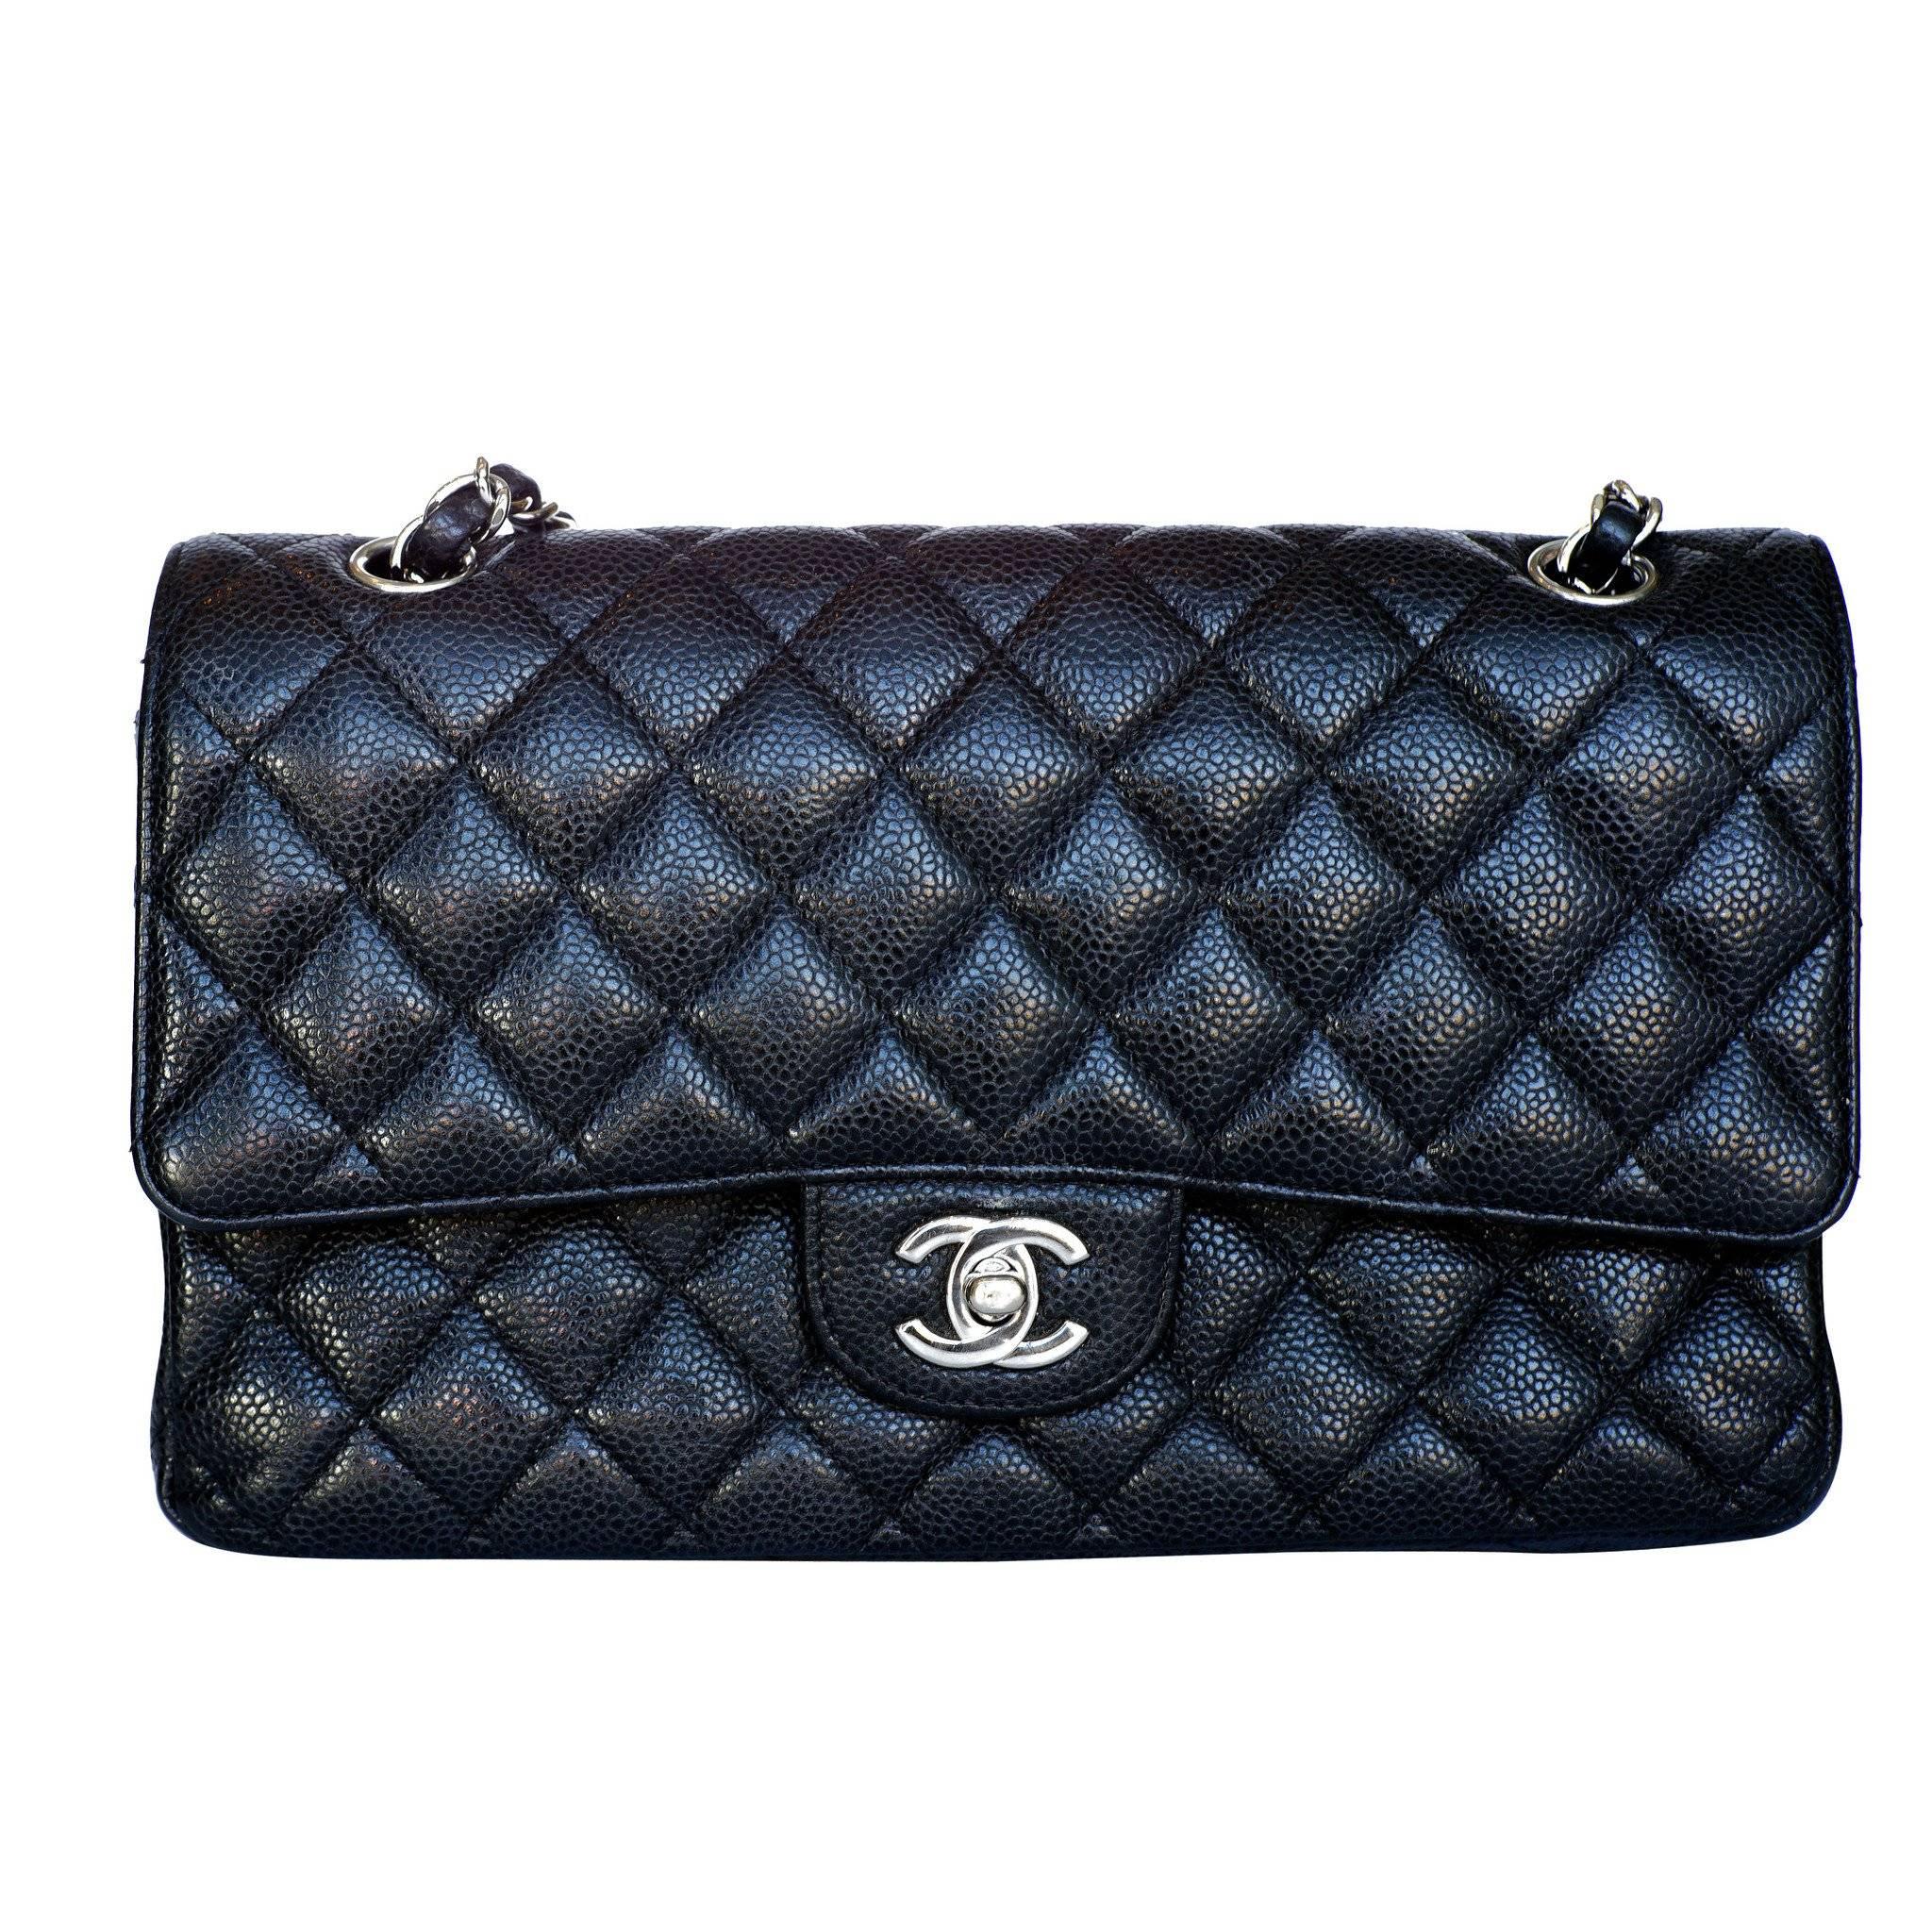 Chanel Black Leather Double Flap Hand Bag